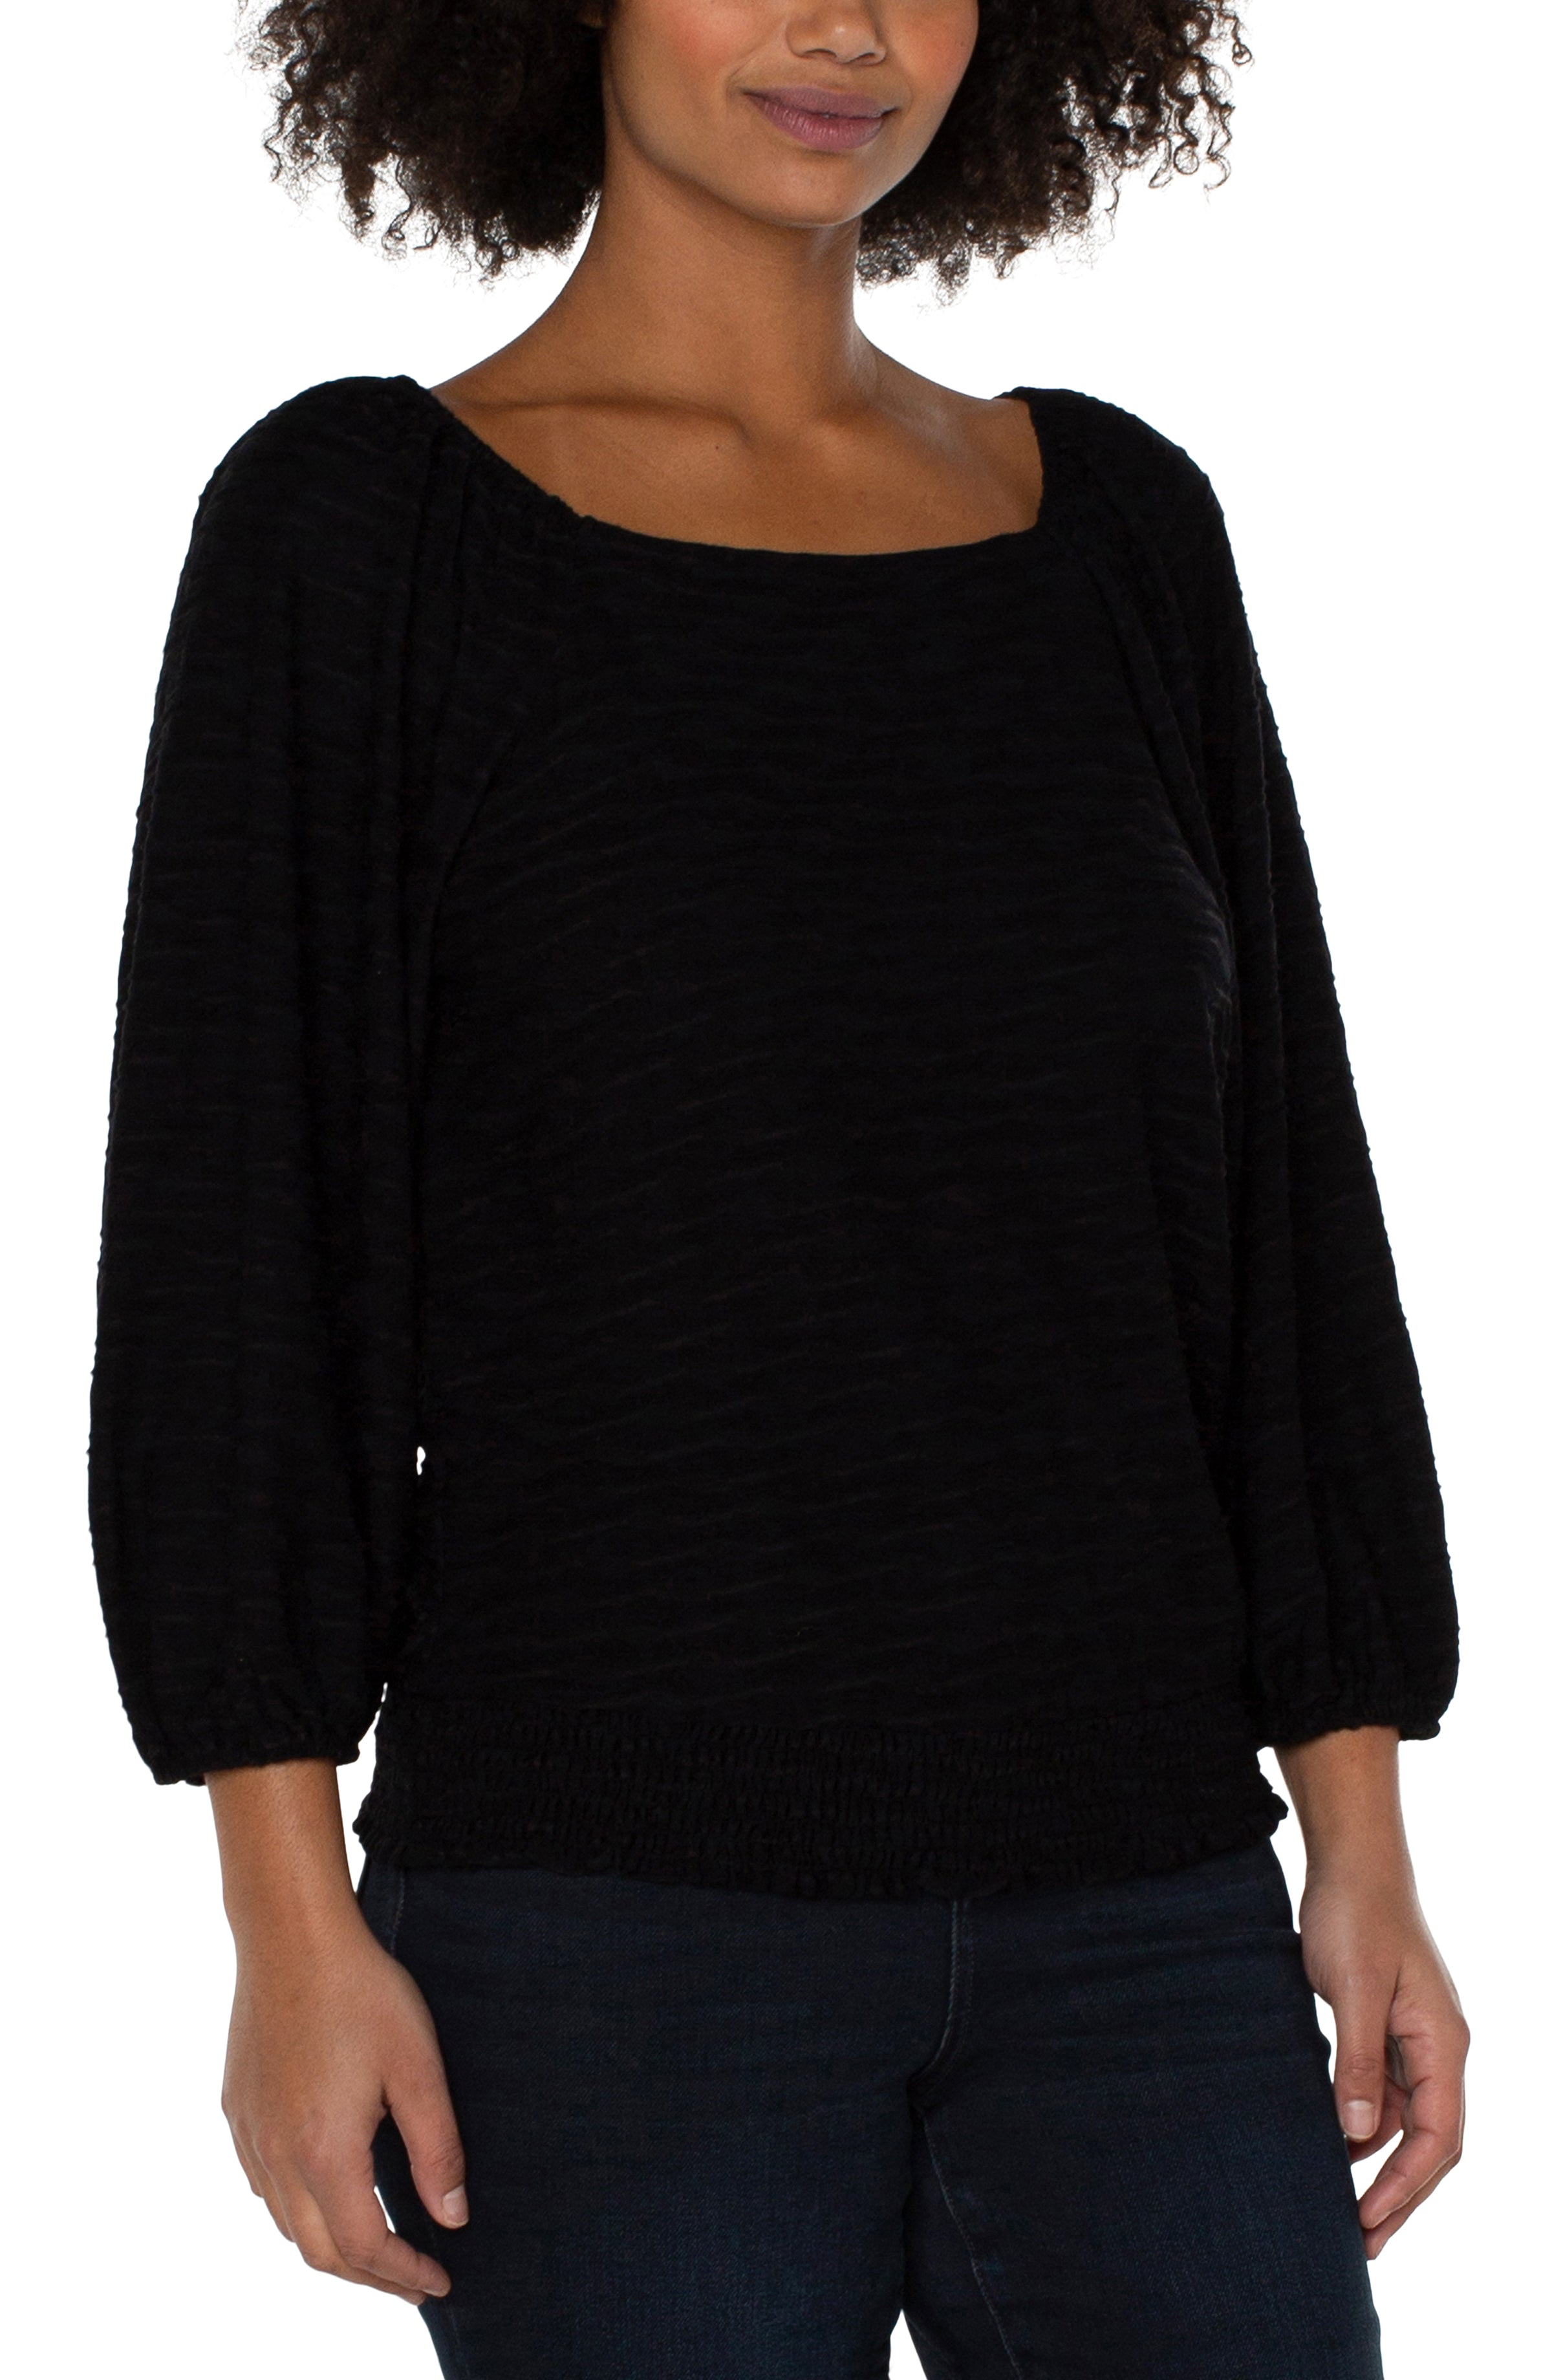 Black smocked top by Liverpool at Tru Blue Boutique